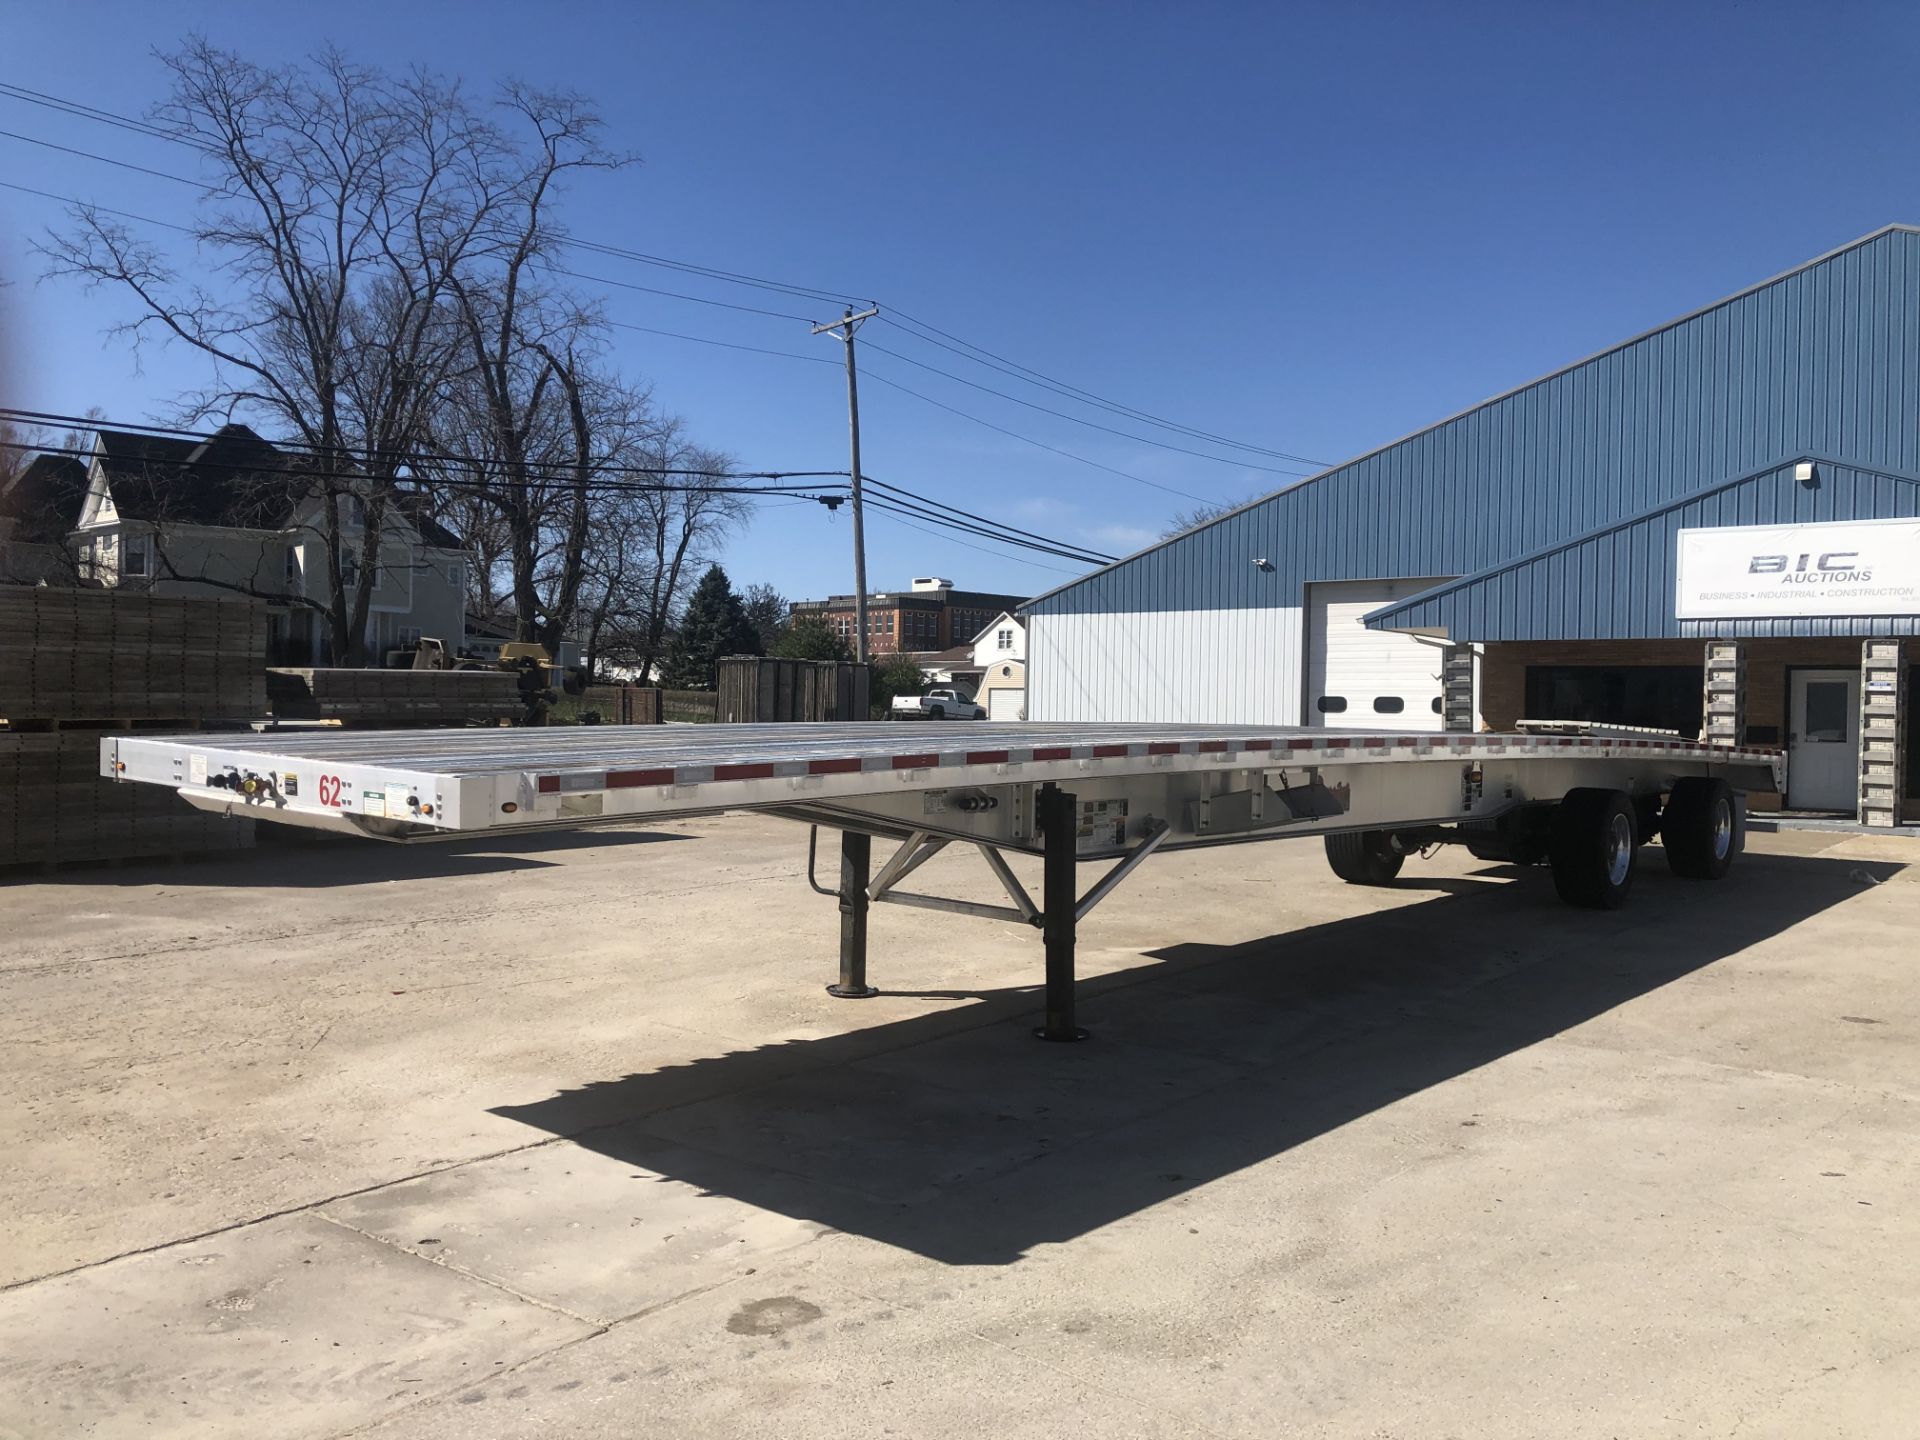 (1) 2018 WILSON Flatbed 53' X 102" Bed, Model AF-1080 SS, VIN #4WW5532A0J6625994 with Ramps